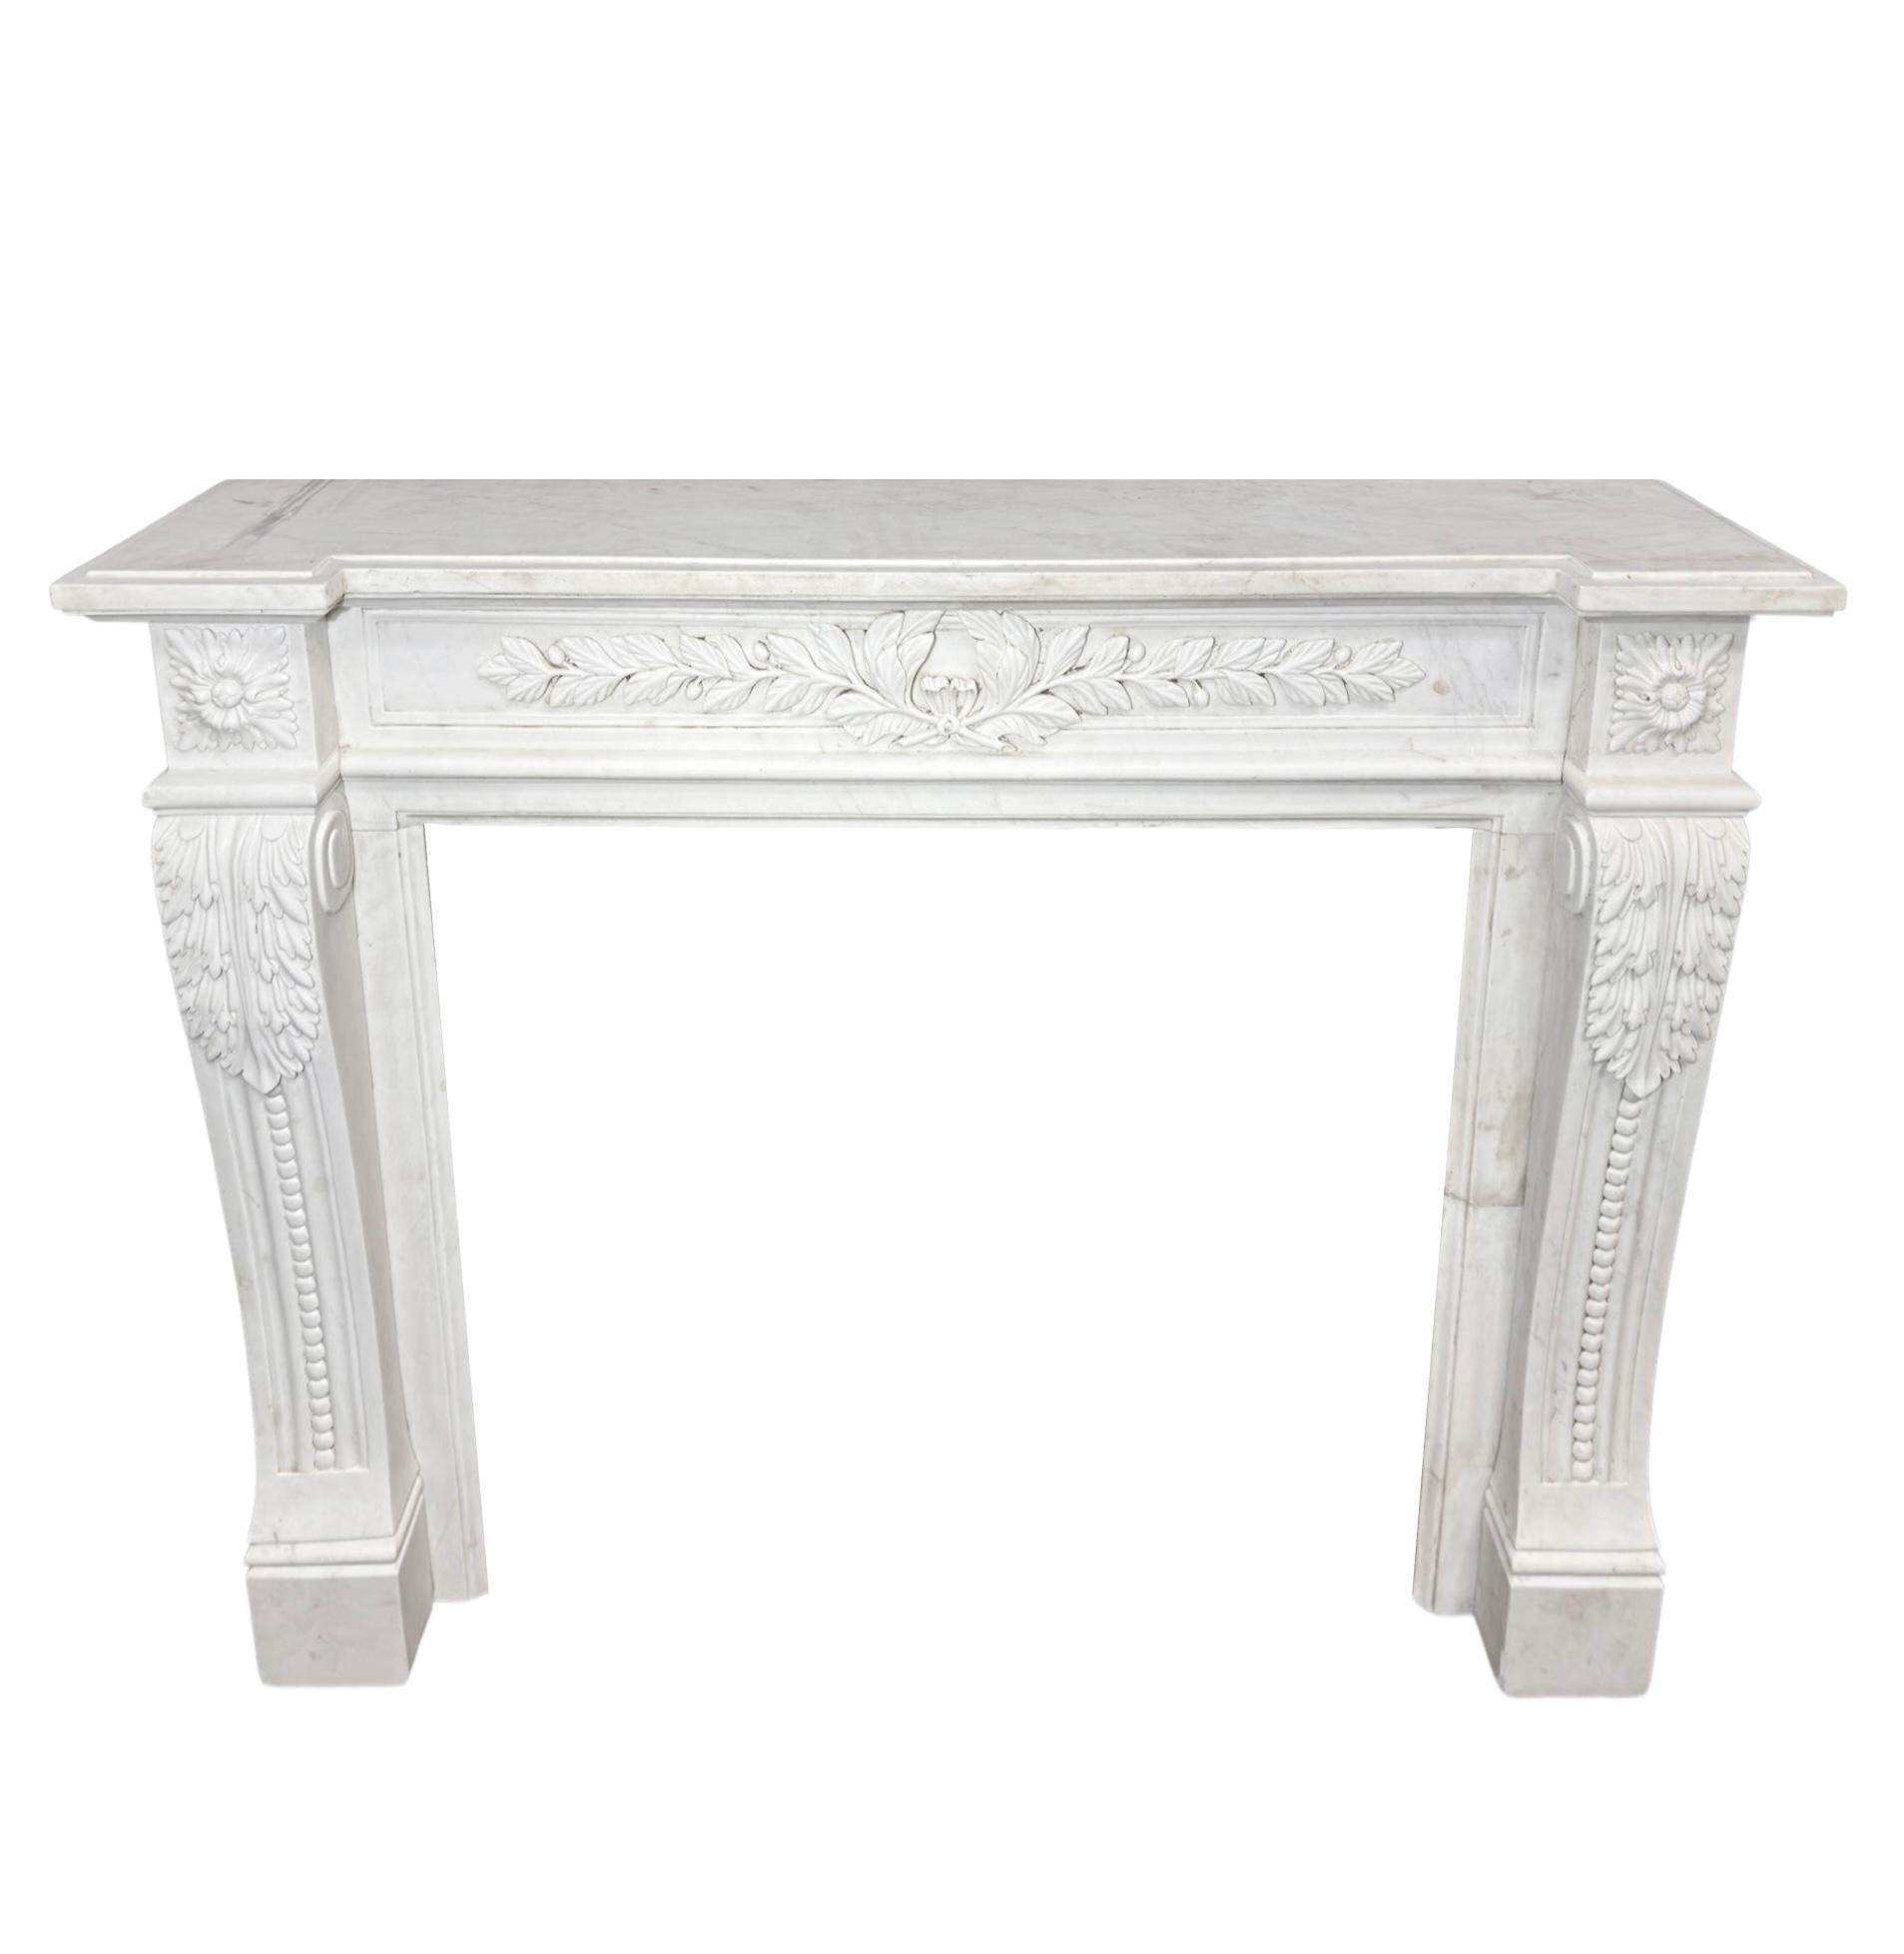 Crafted with the finest white Carrara marble from France, this Louis XVI style mantel from the 1890s boasts intricate carvings. Elevate your space with a touch of elegance and timeless beauty. Made from high-quality materials, this mantel is sure to